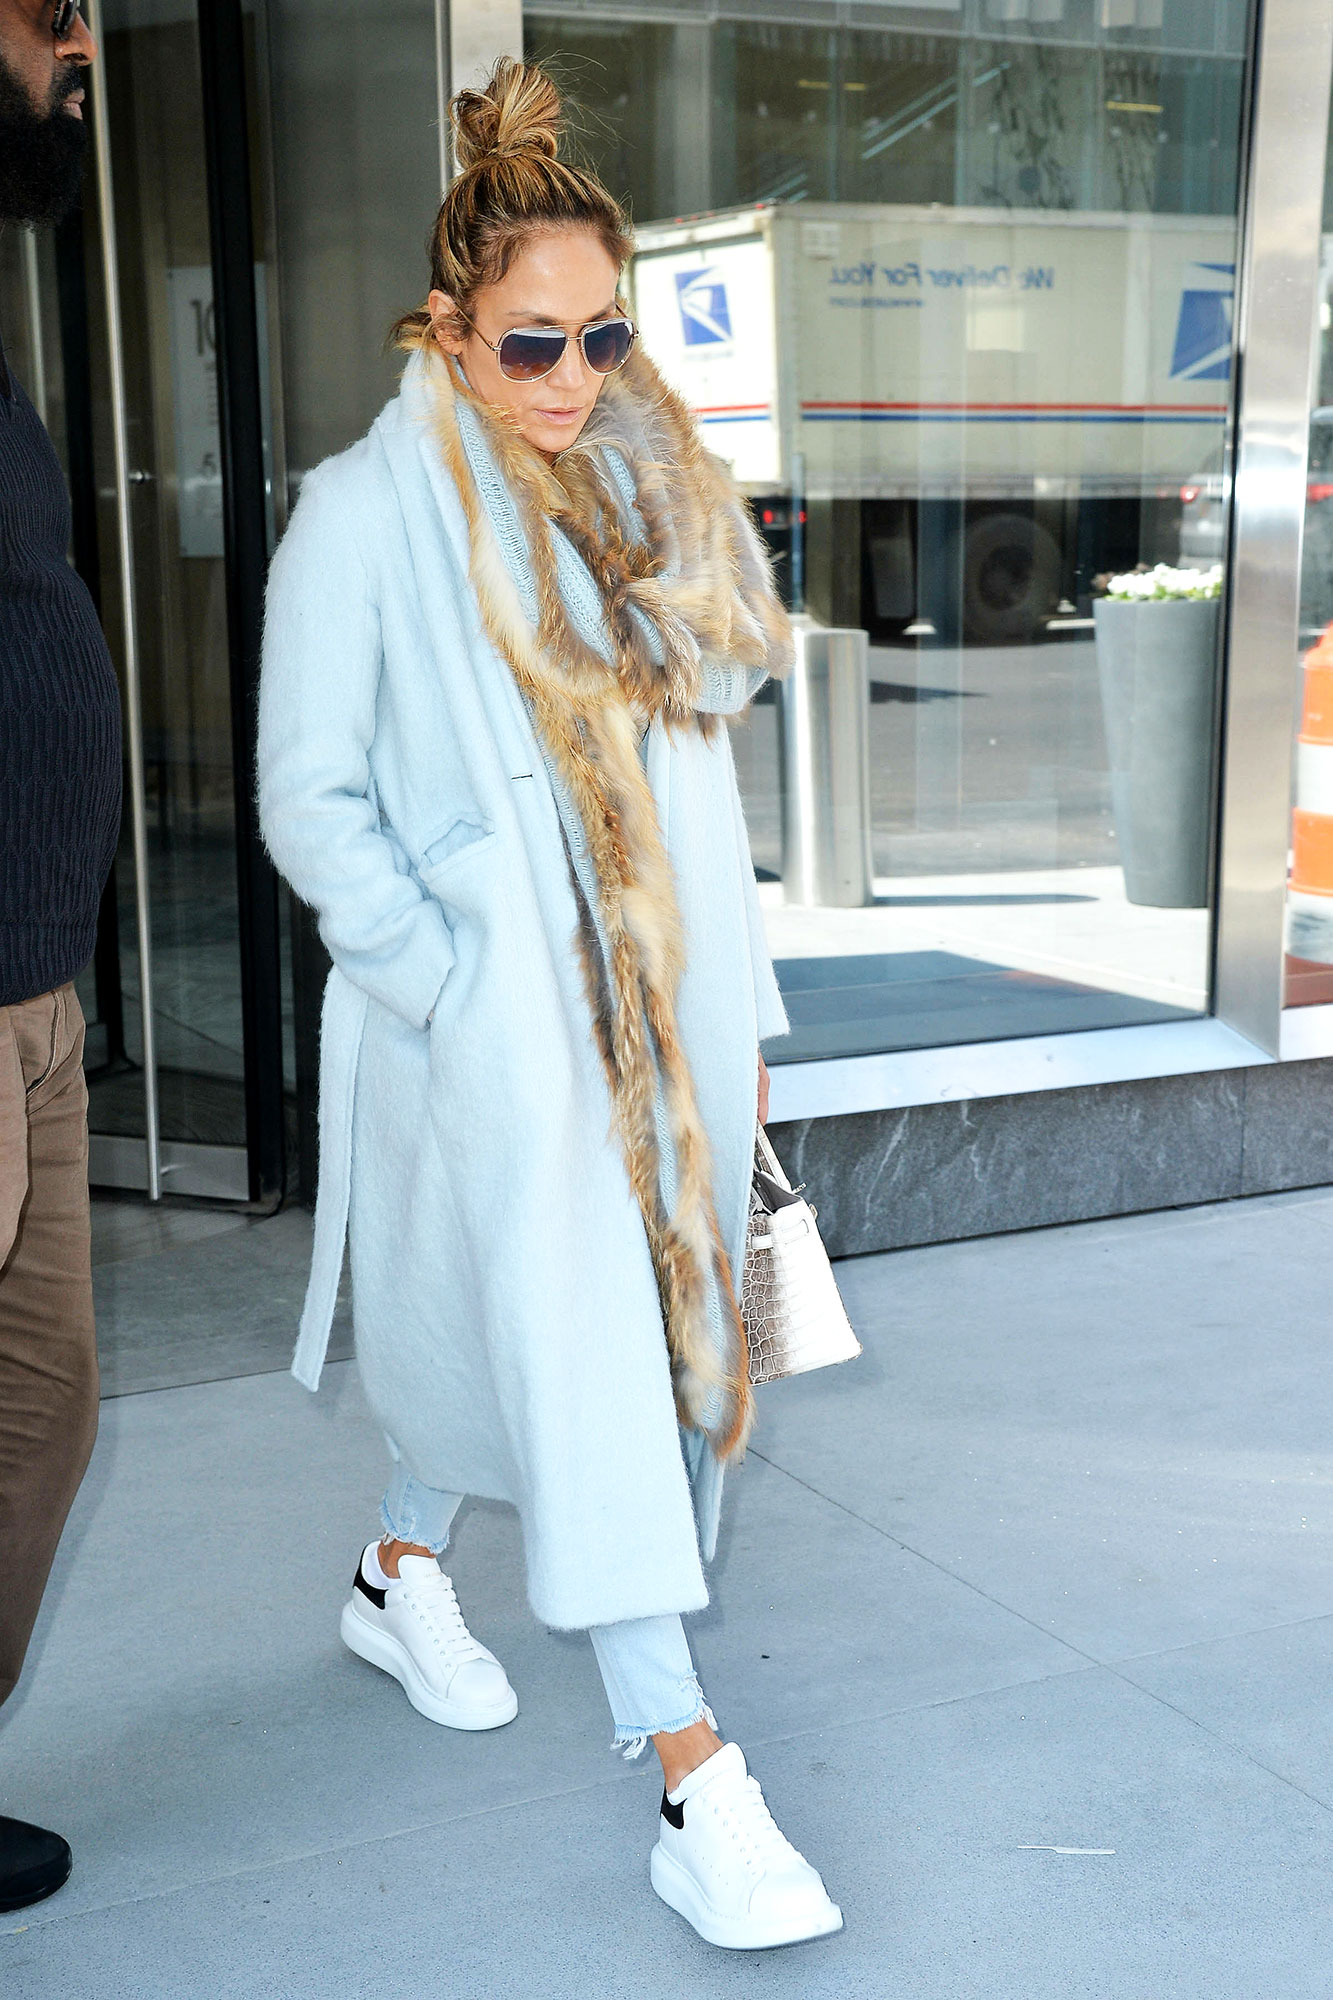 Jennifer Lopez Wore a Glam Faux Fur Coat in New York City